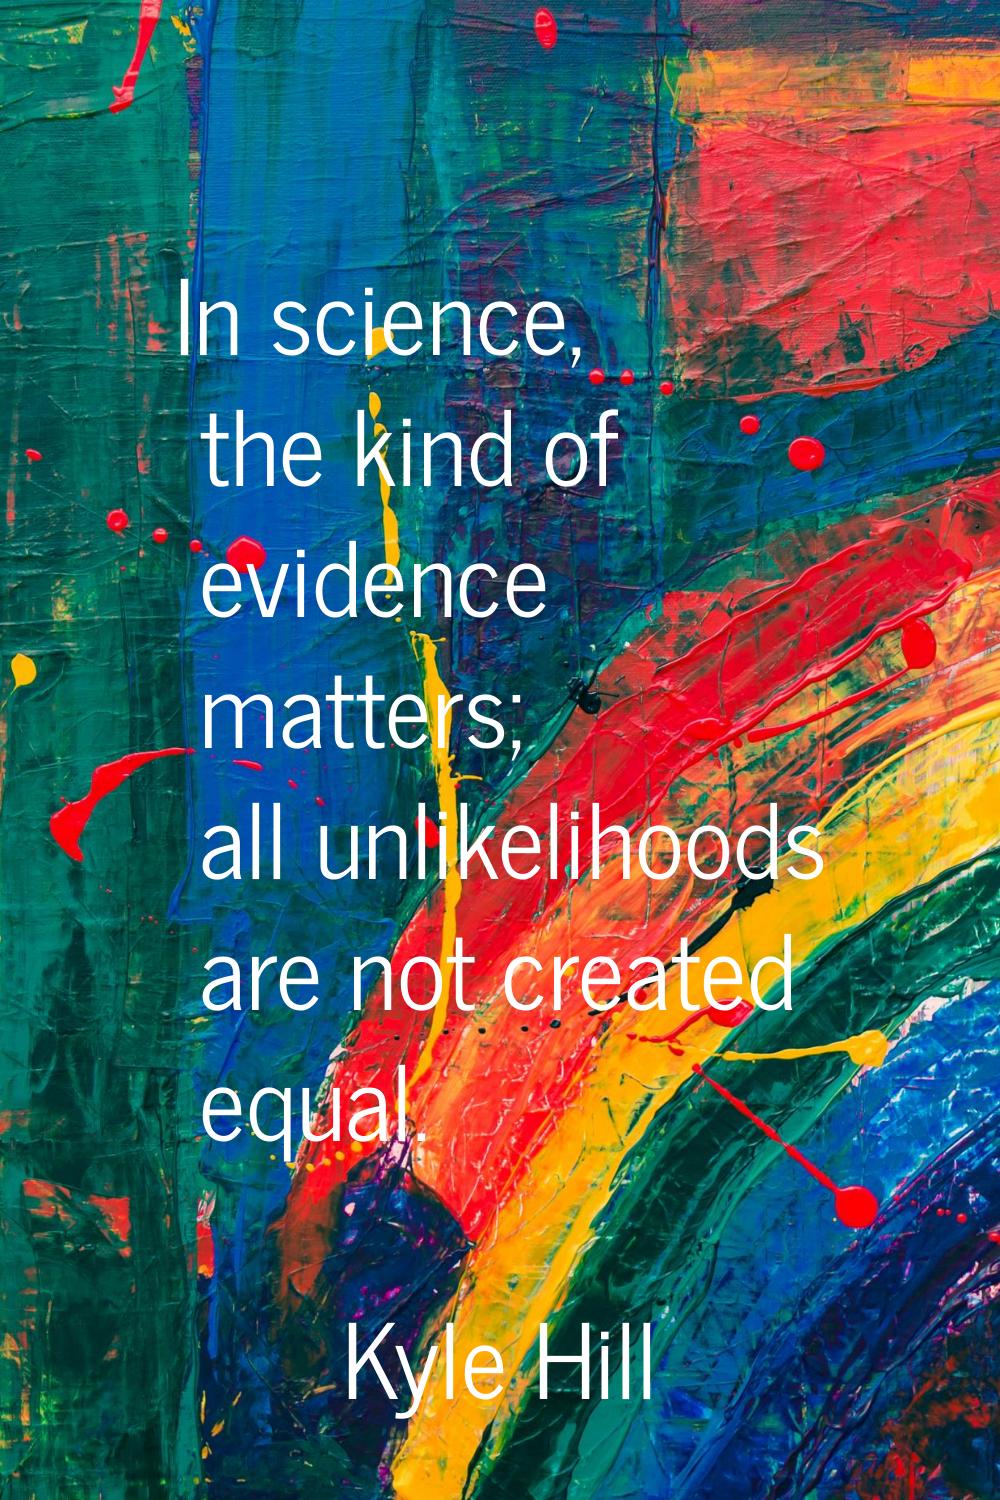 In science, the kind of evidence matters; all unlikelihoods are not created equal.